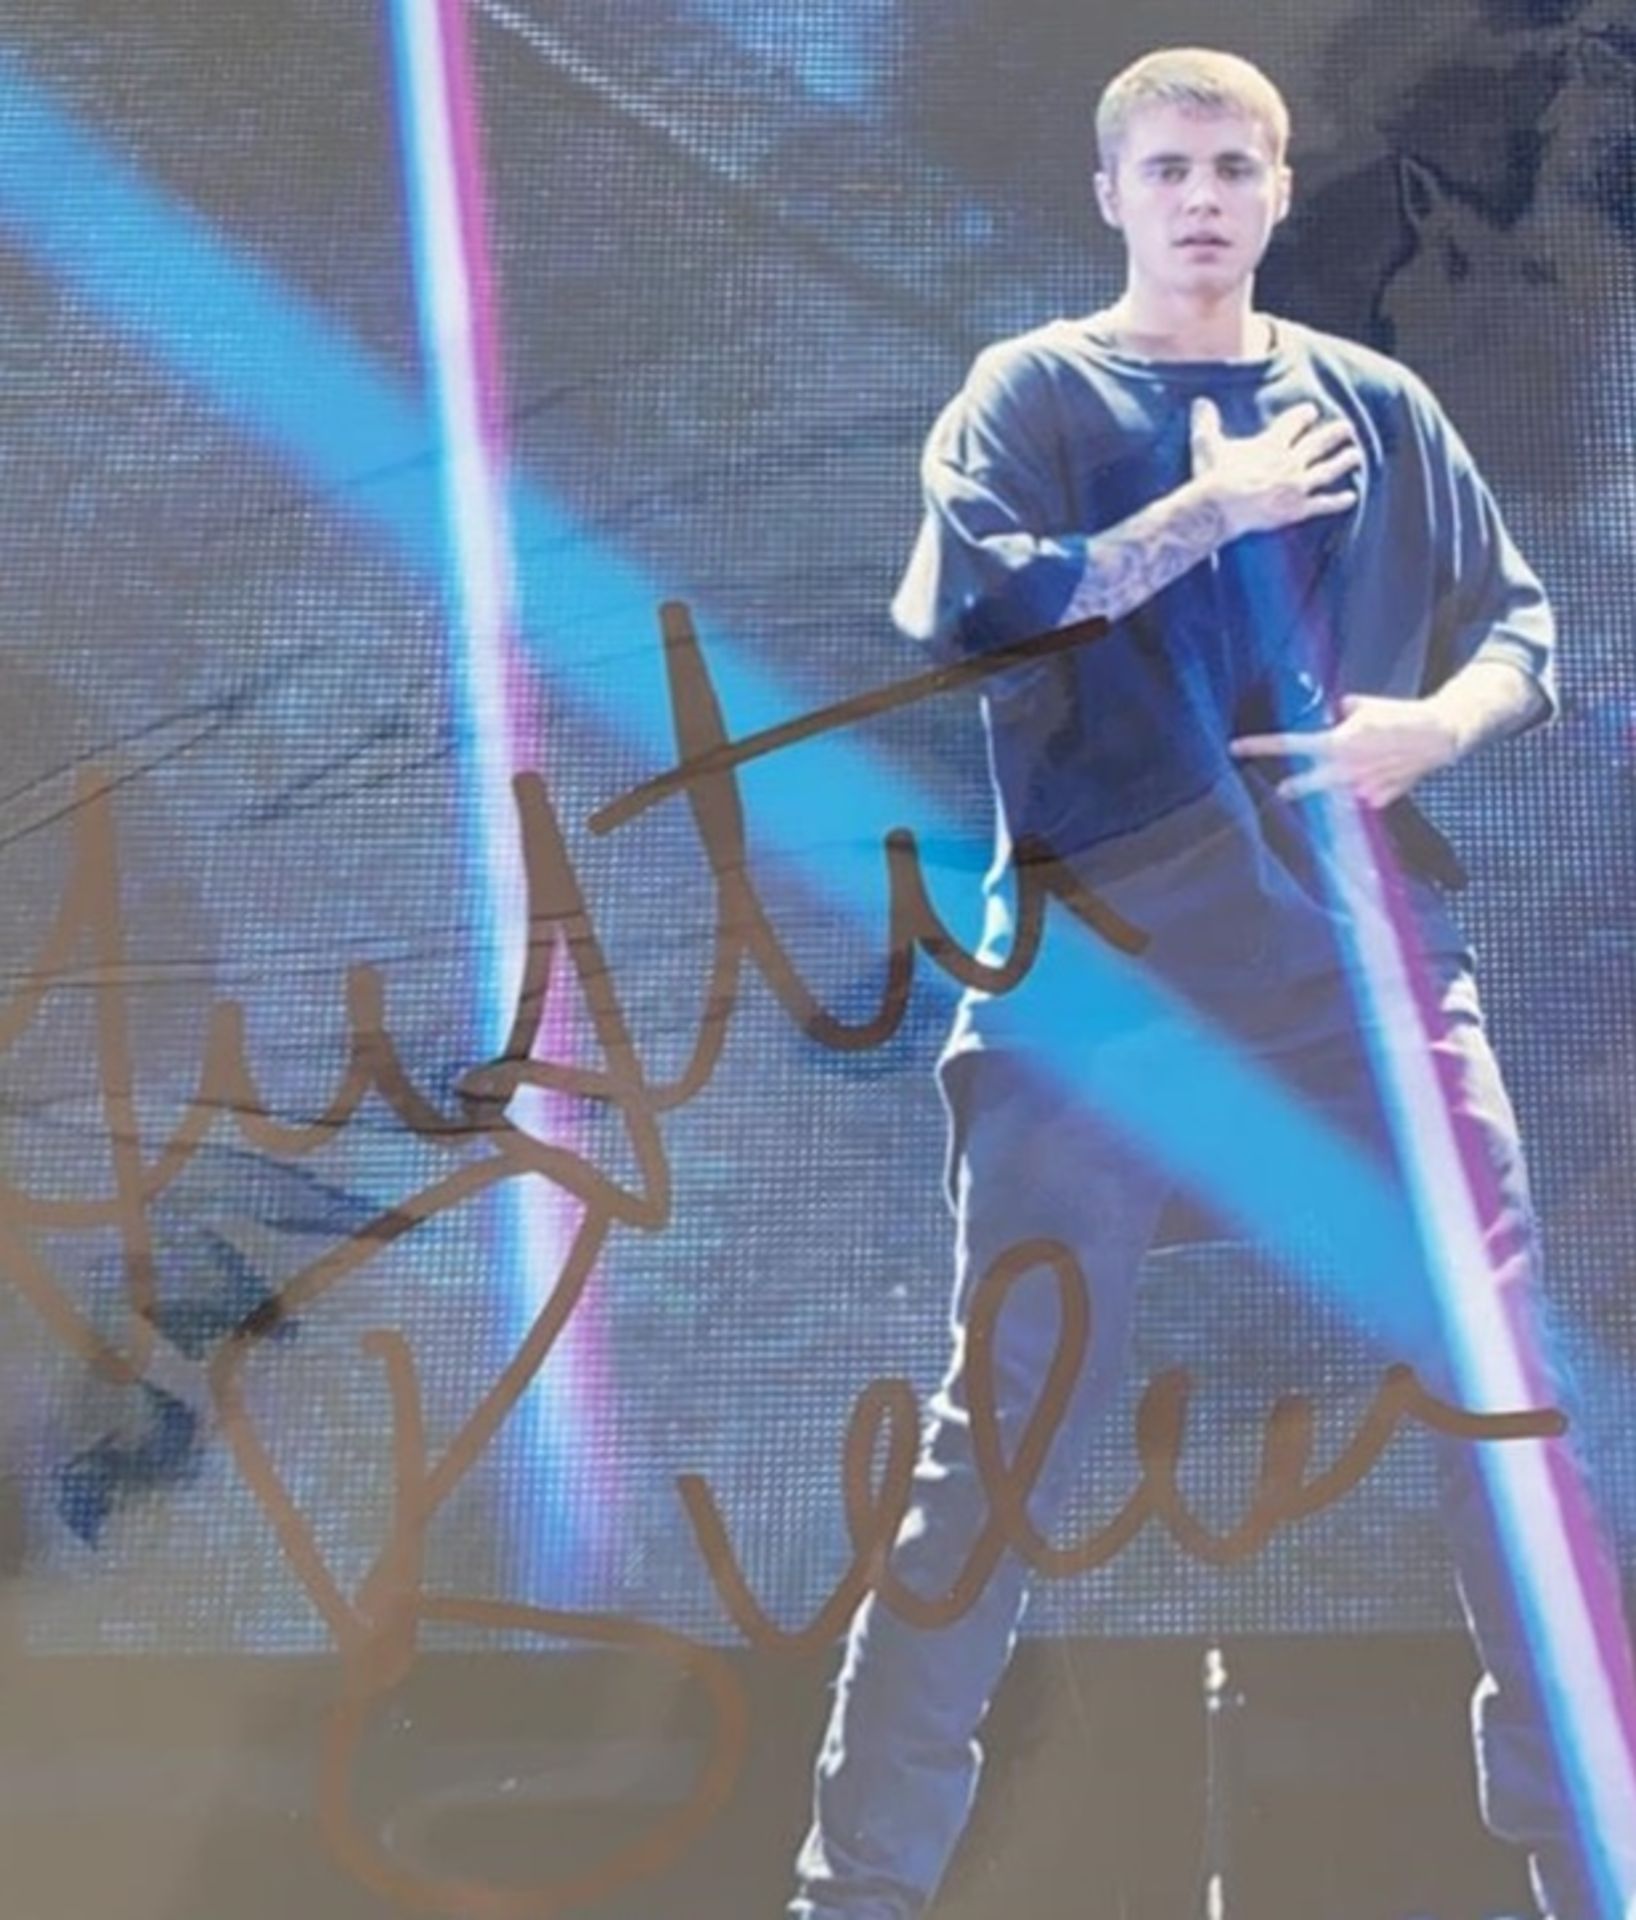 1 x Signed Autograph Picture - JUSTIN BIEBER - With COA - Size 12 x 8 Inch - NO VAT ON THE HAMMER